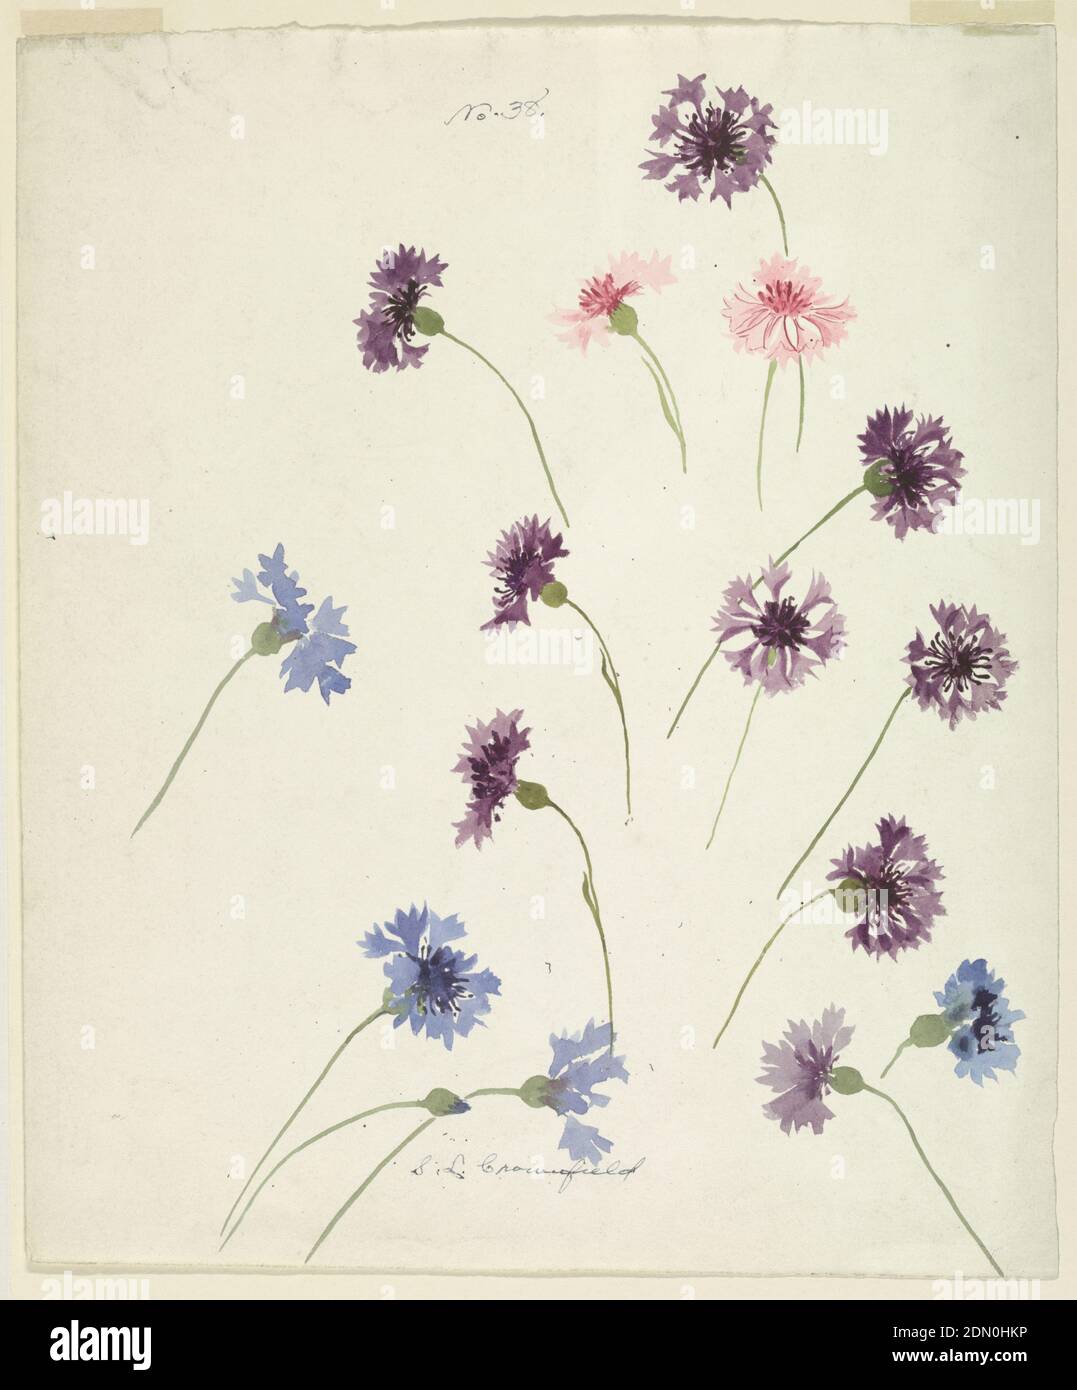 Study of Cornflowers, Sophia L. Crownfield, (American, 1862–1929), Brush and watercolor on white paper, Vertical sheet depicting blue, violet, and pink cornflowers., USA, late 19th century, nature studies, Drawing Stock Photo